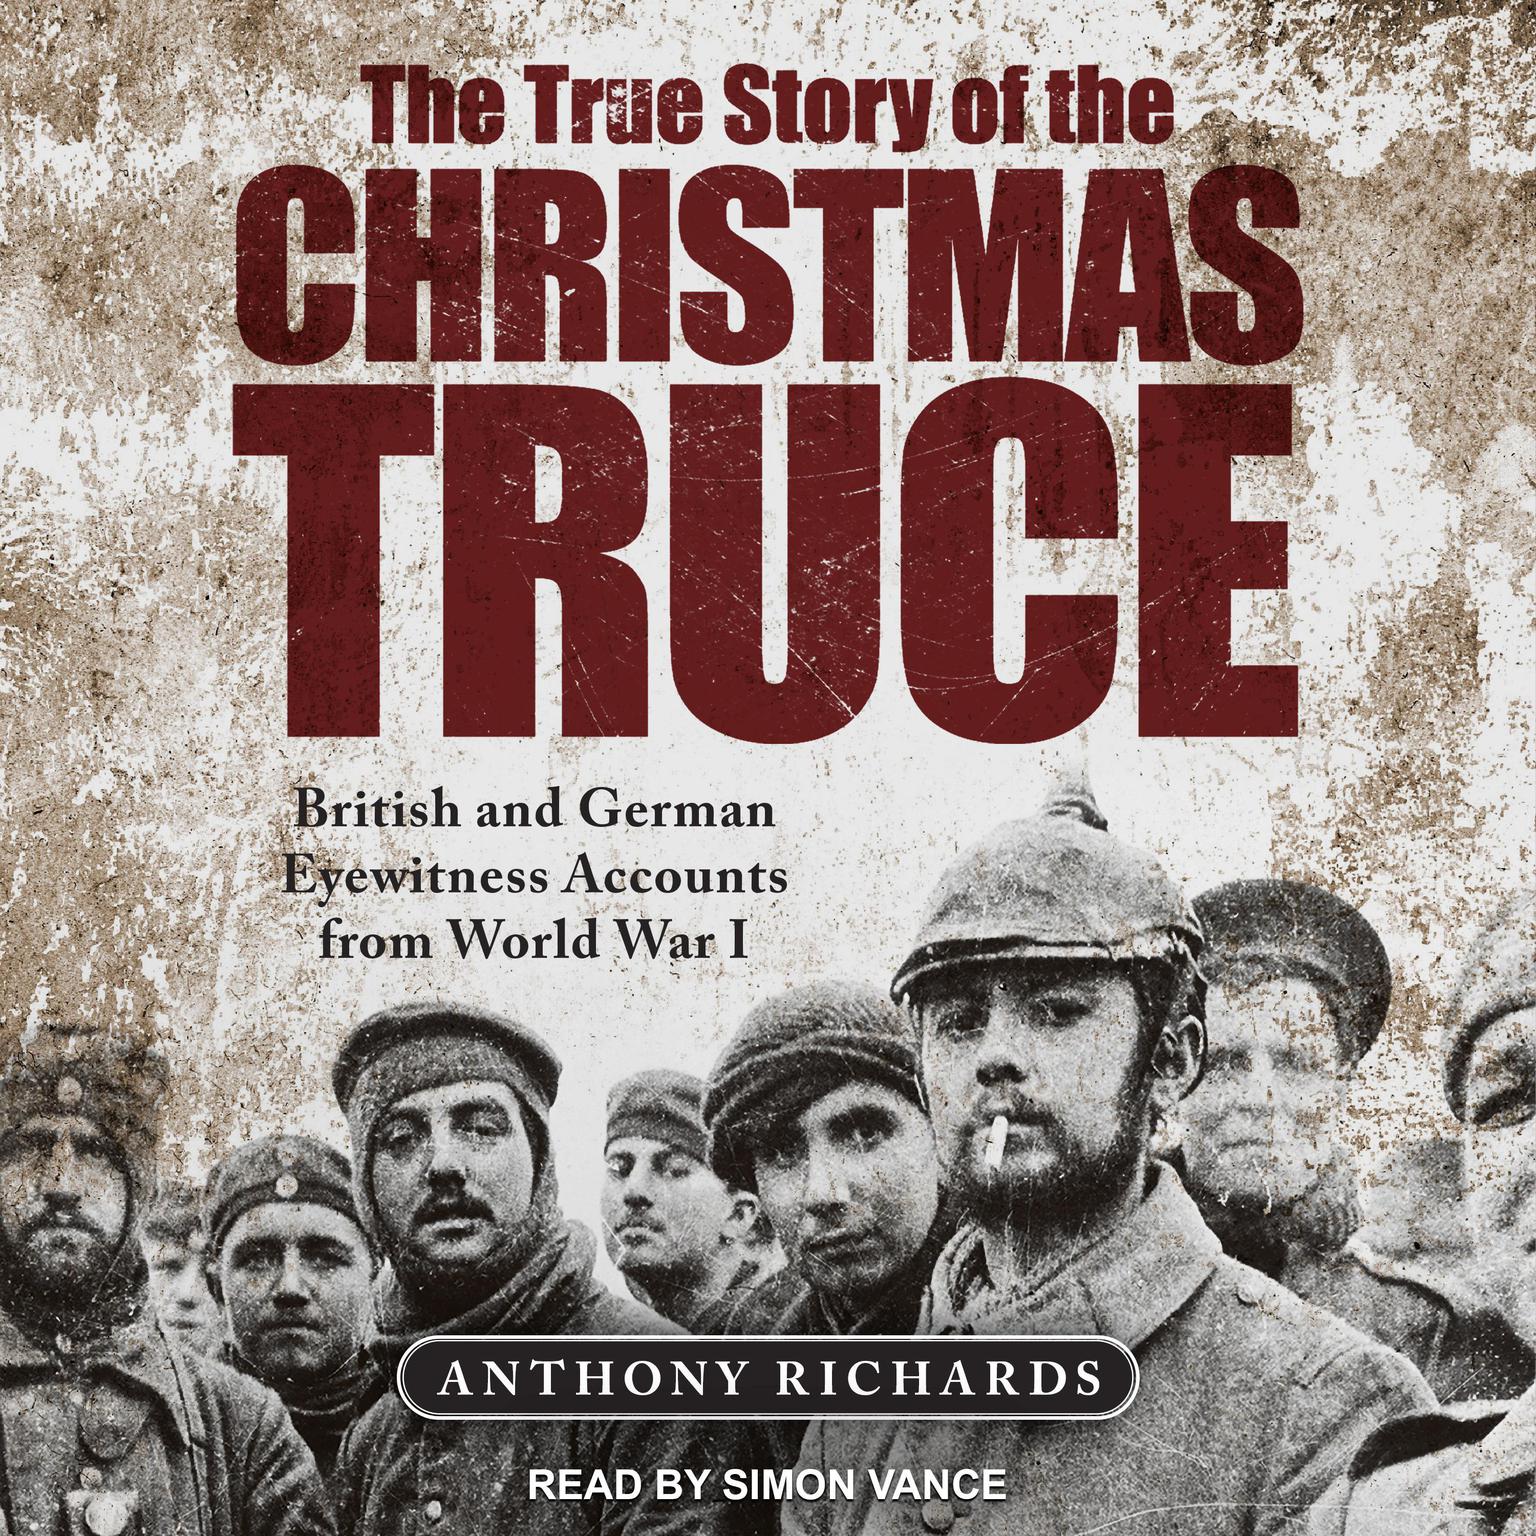 The True Story of the Christmas Truce: British and German Eyewitness Accounts from World War I Audiobook, by Anthony Richards